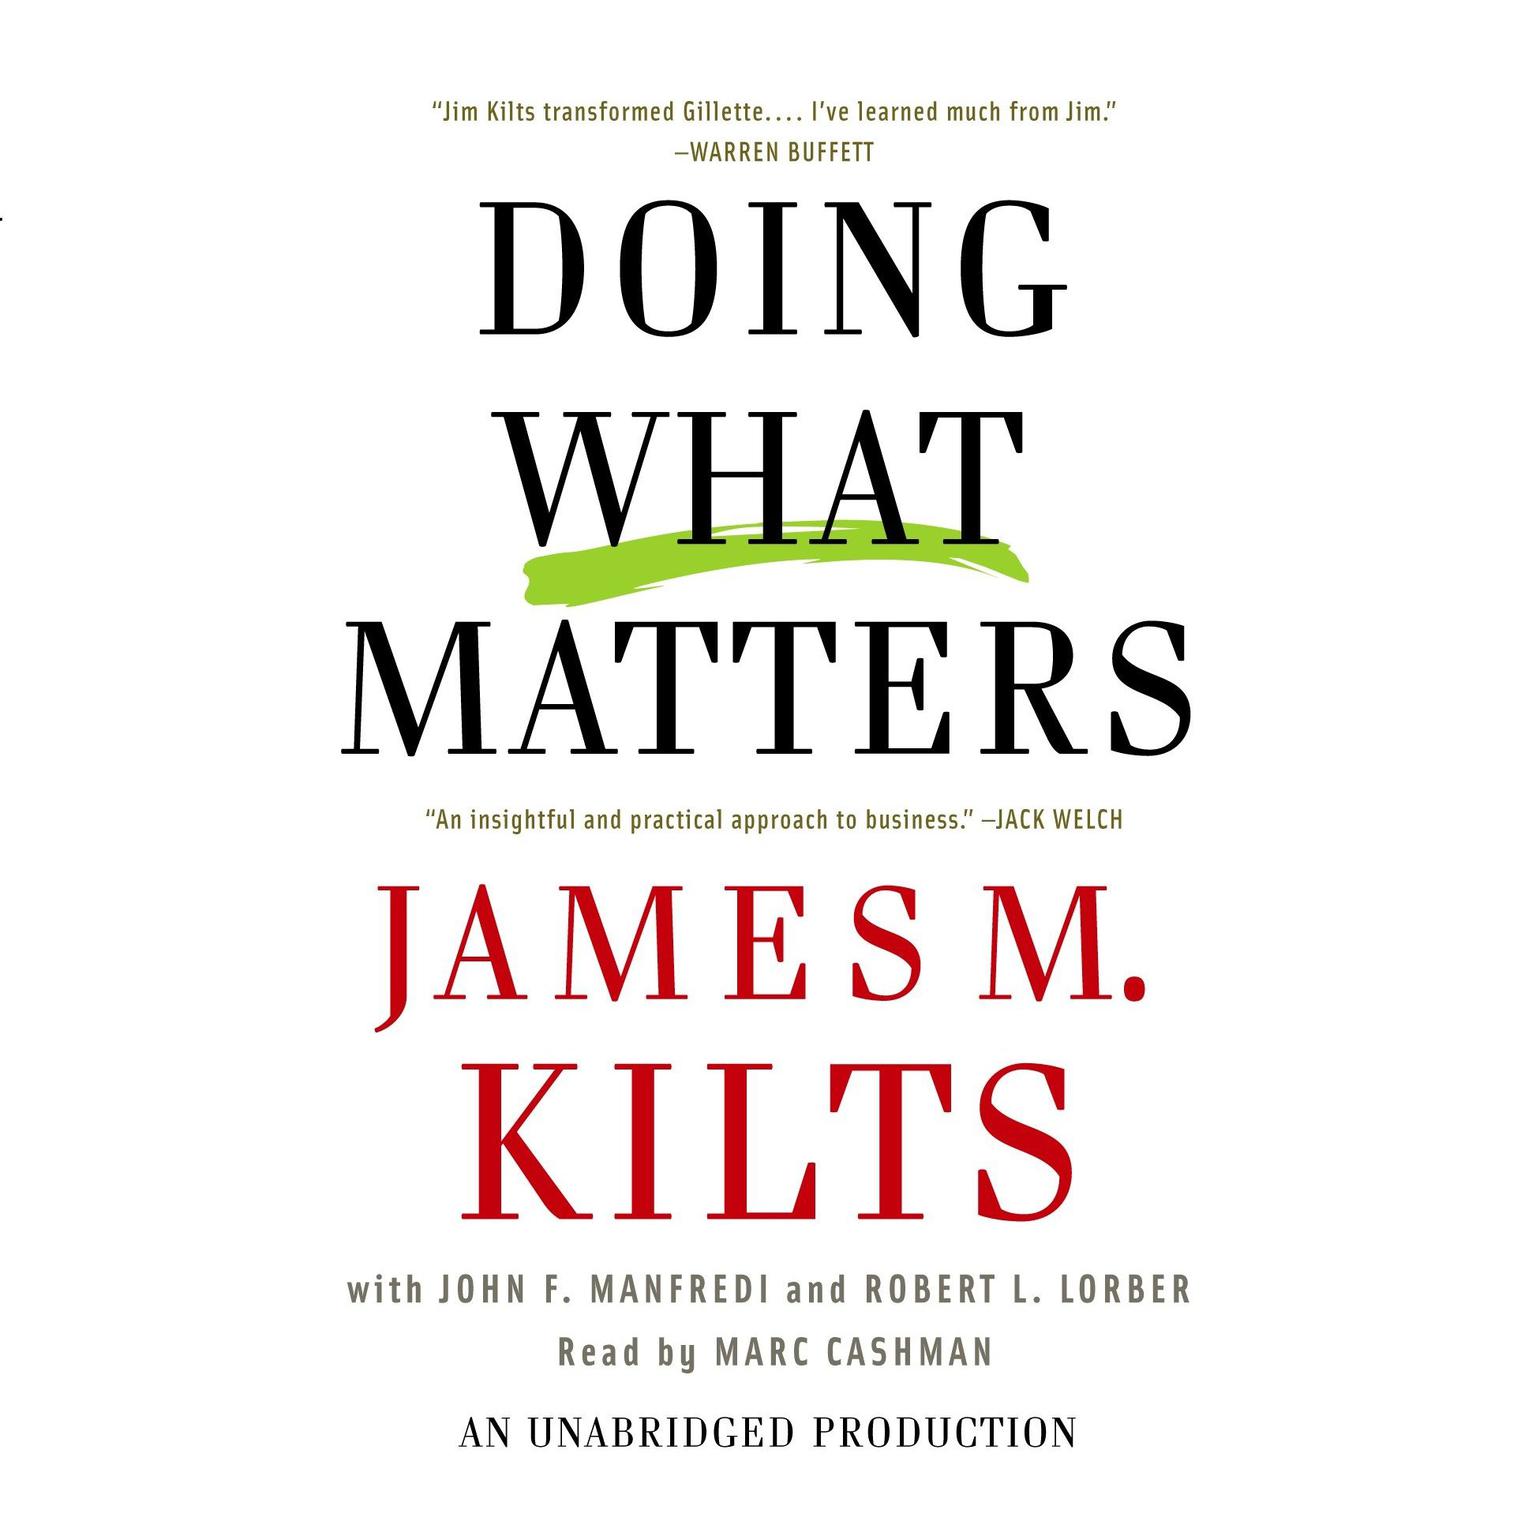 Doing What Matters (Abridged): How to Get Results That Make a Difference - The Revolutionary Old-Fashioned Approach Audiobook, by James M. Kilts